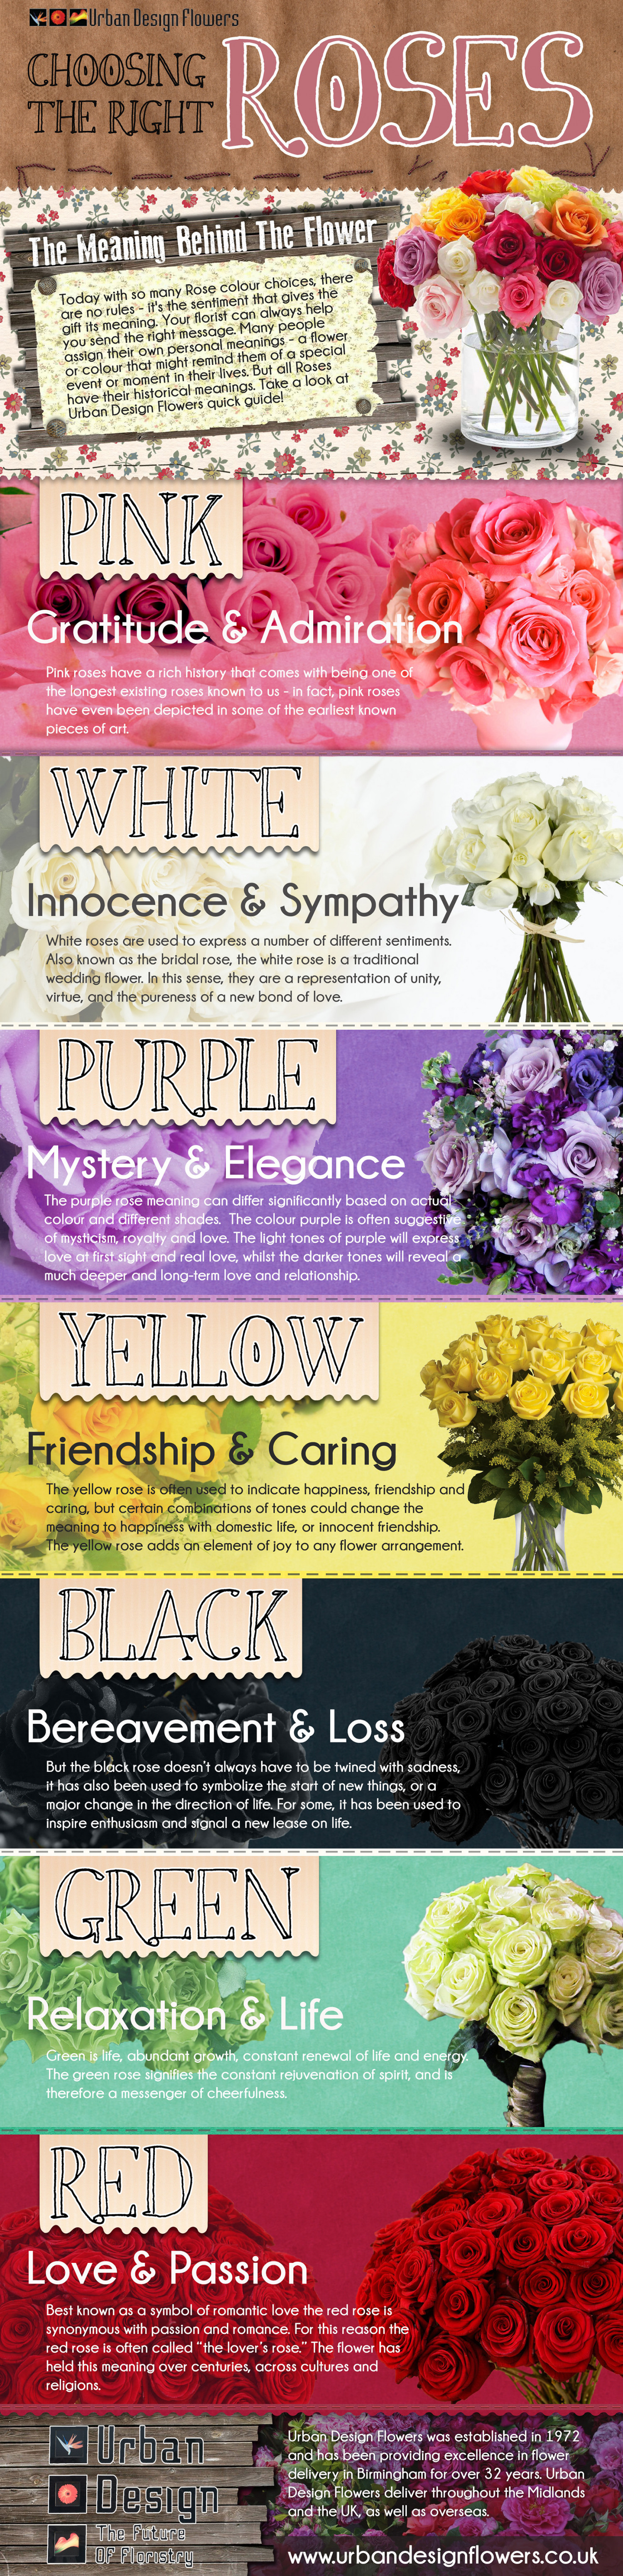 The Colors of Roses Infographic